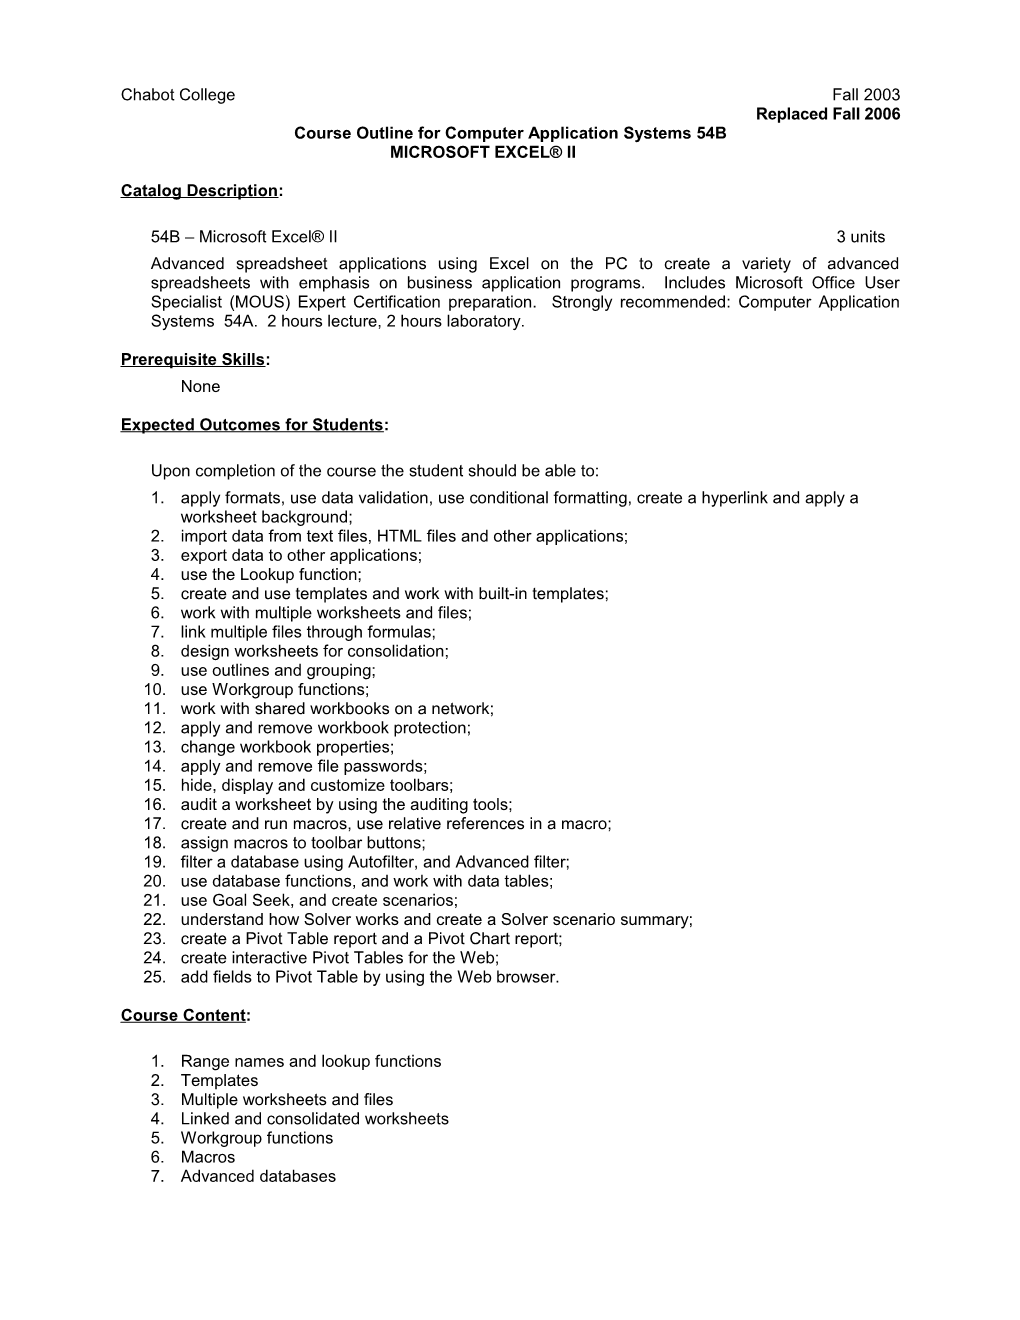 Course Outline for Computer Application Systems 54B